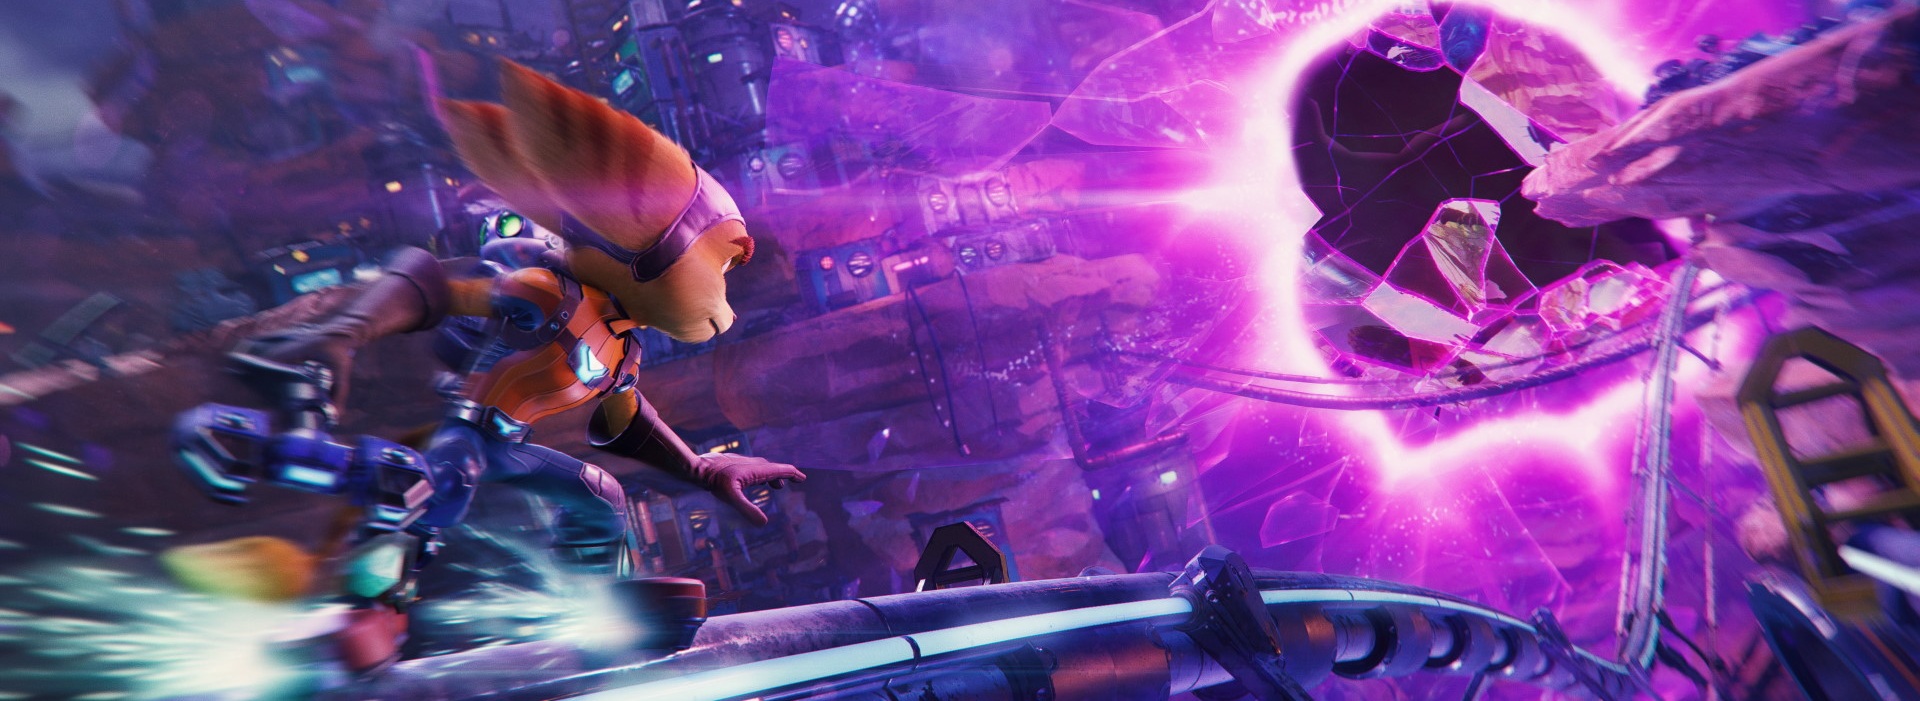 Ratchet and Clank Rift Apart Can Run at 60 FPS on PlayStation 5